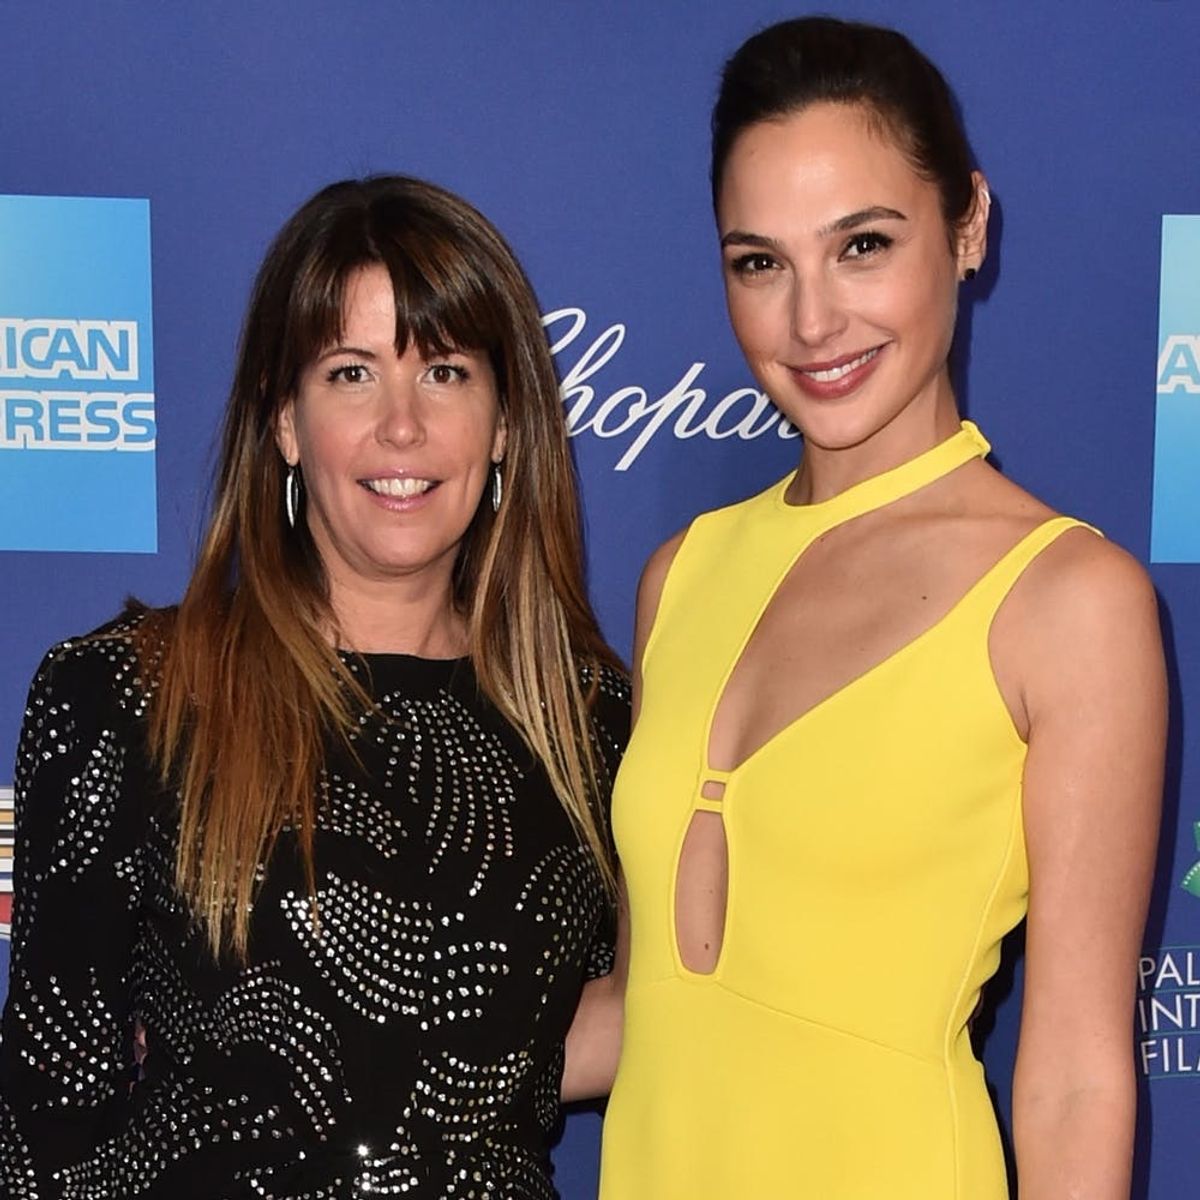 ‘Wonder Woman’ Director Patty Jenkins Says the Sequel Will Be ‘Totally Different’